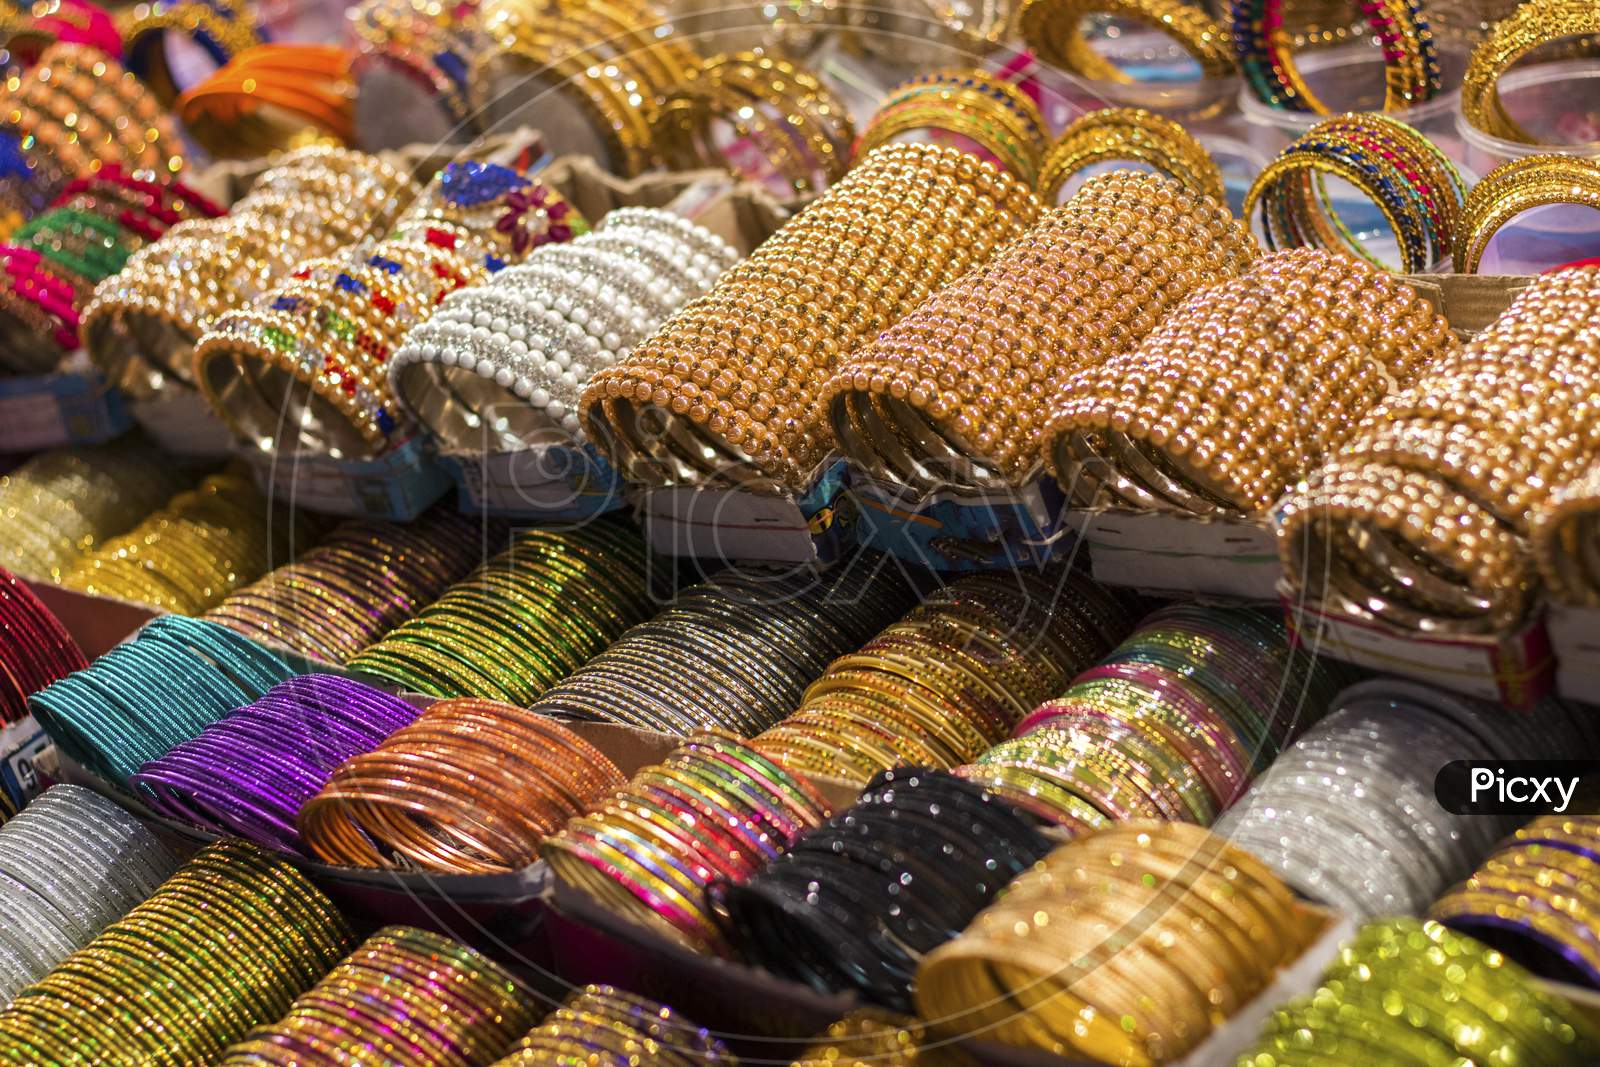 Multi-Colored Indian Glass/Metal Bangles Arranged On The Shelf For Sale